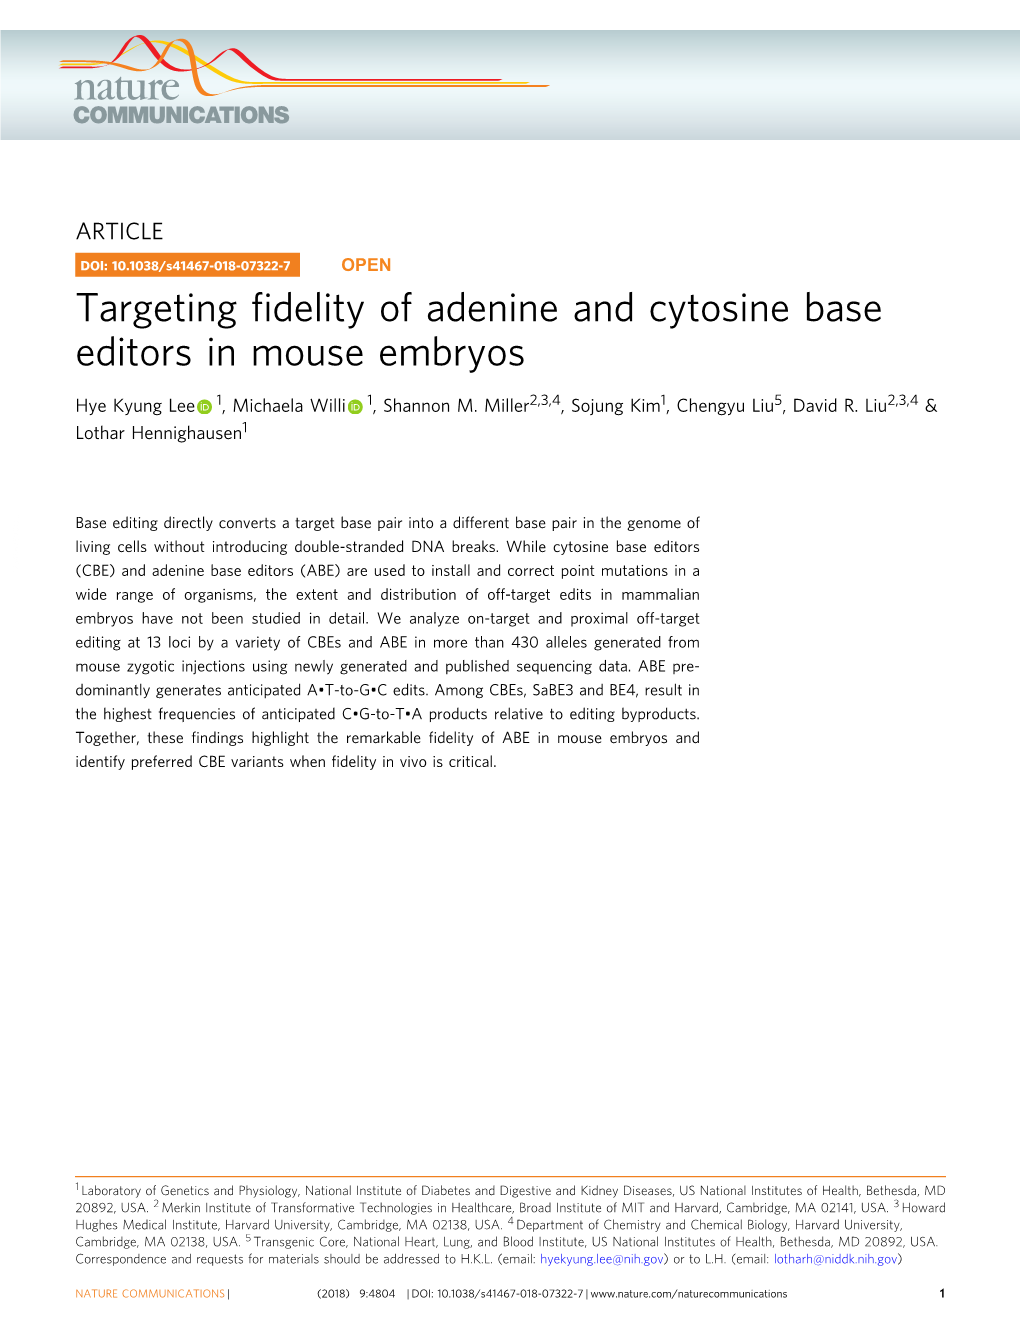 Targeting Fidelity of Adenine and Cytosine Base Editors in Mouse Embryos